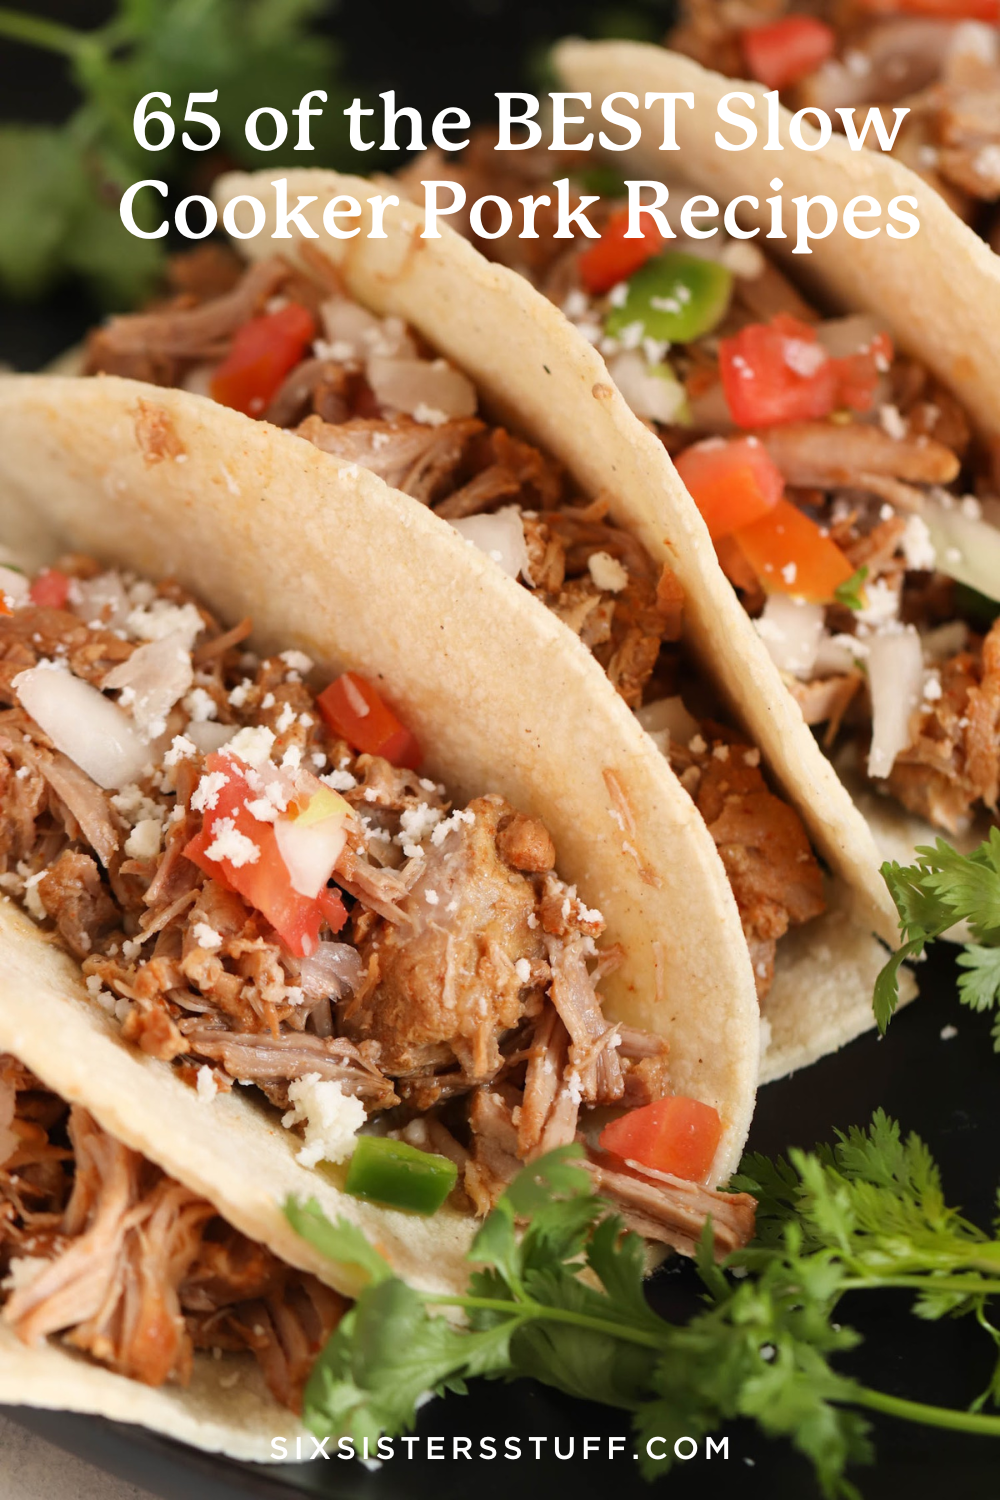 65 of the BEST Slow Cooker Pork Recipes